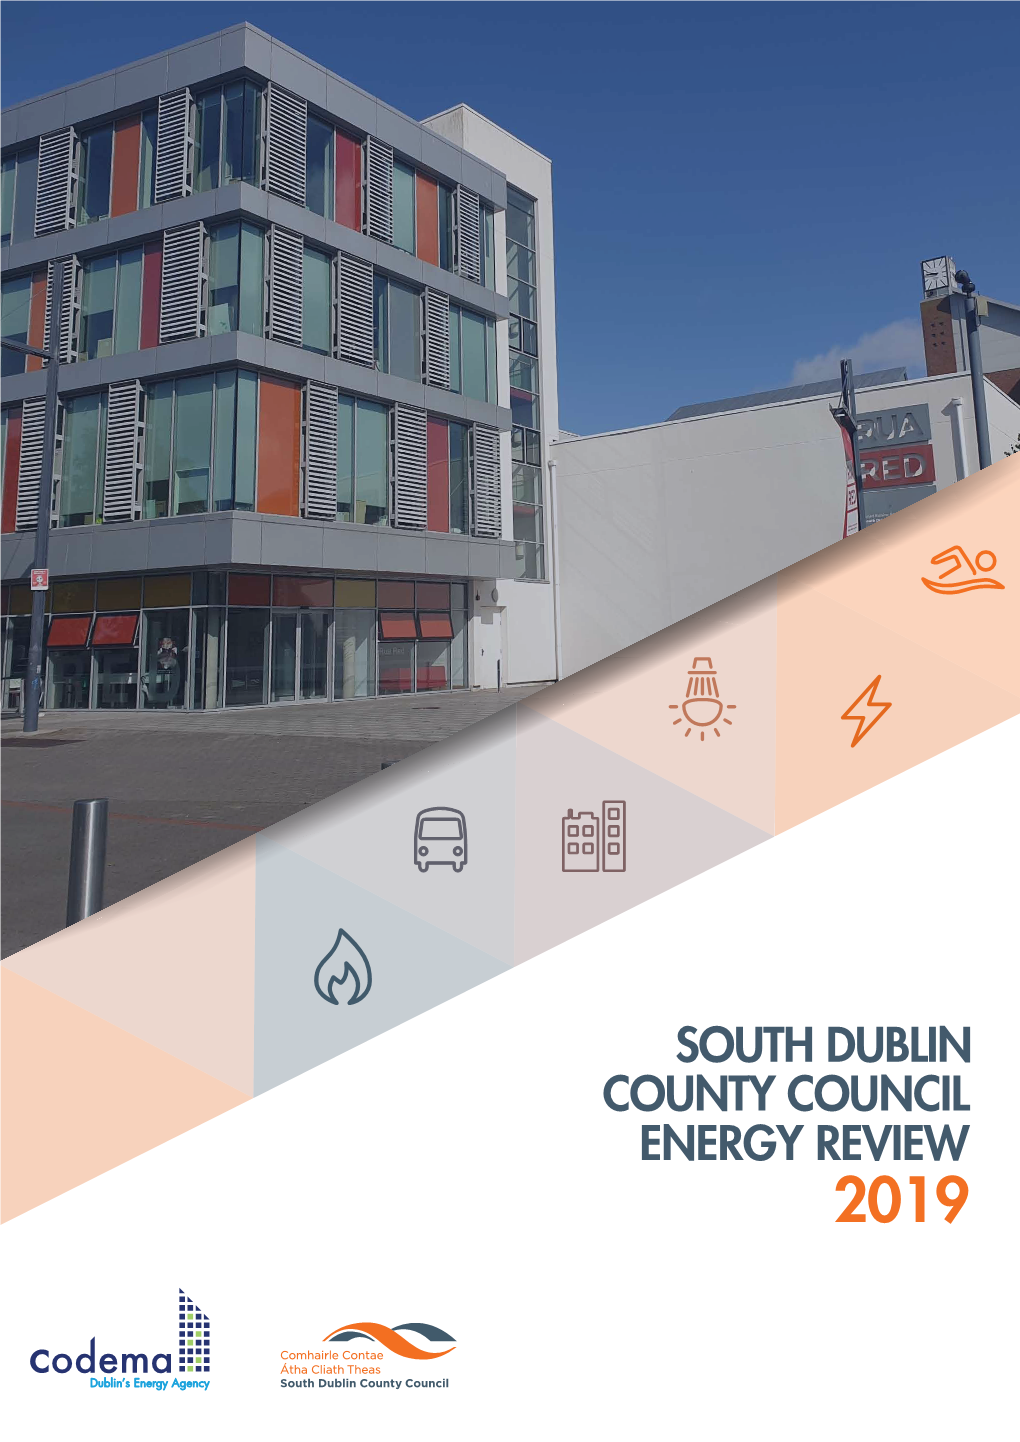 South Dublin County Council Energy Review 2019